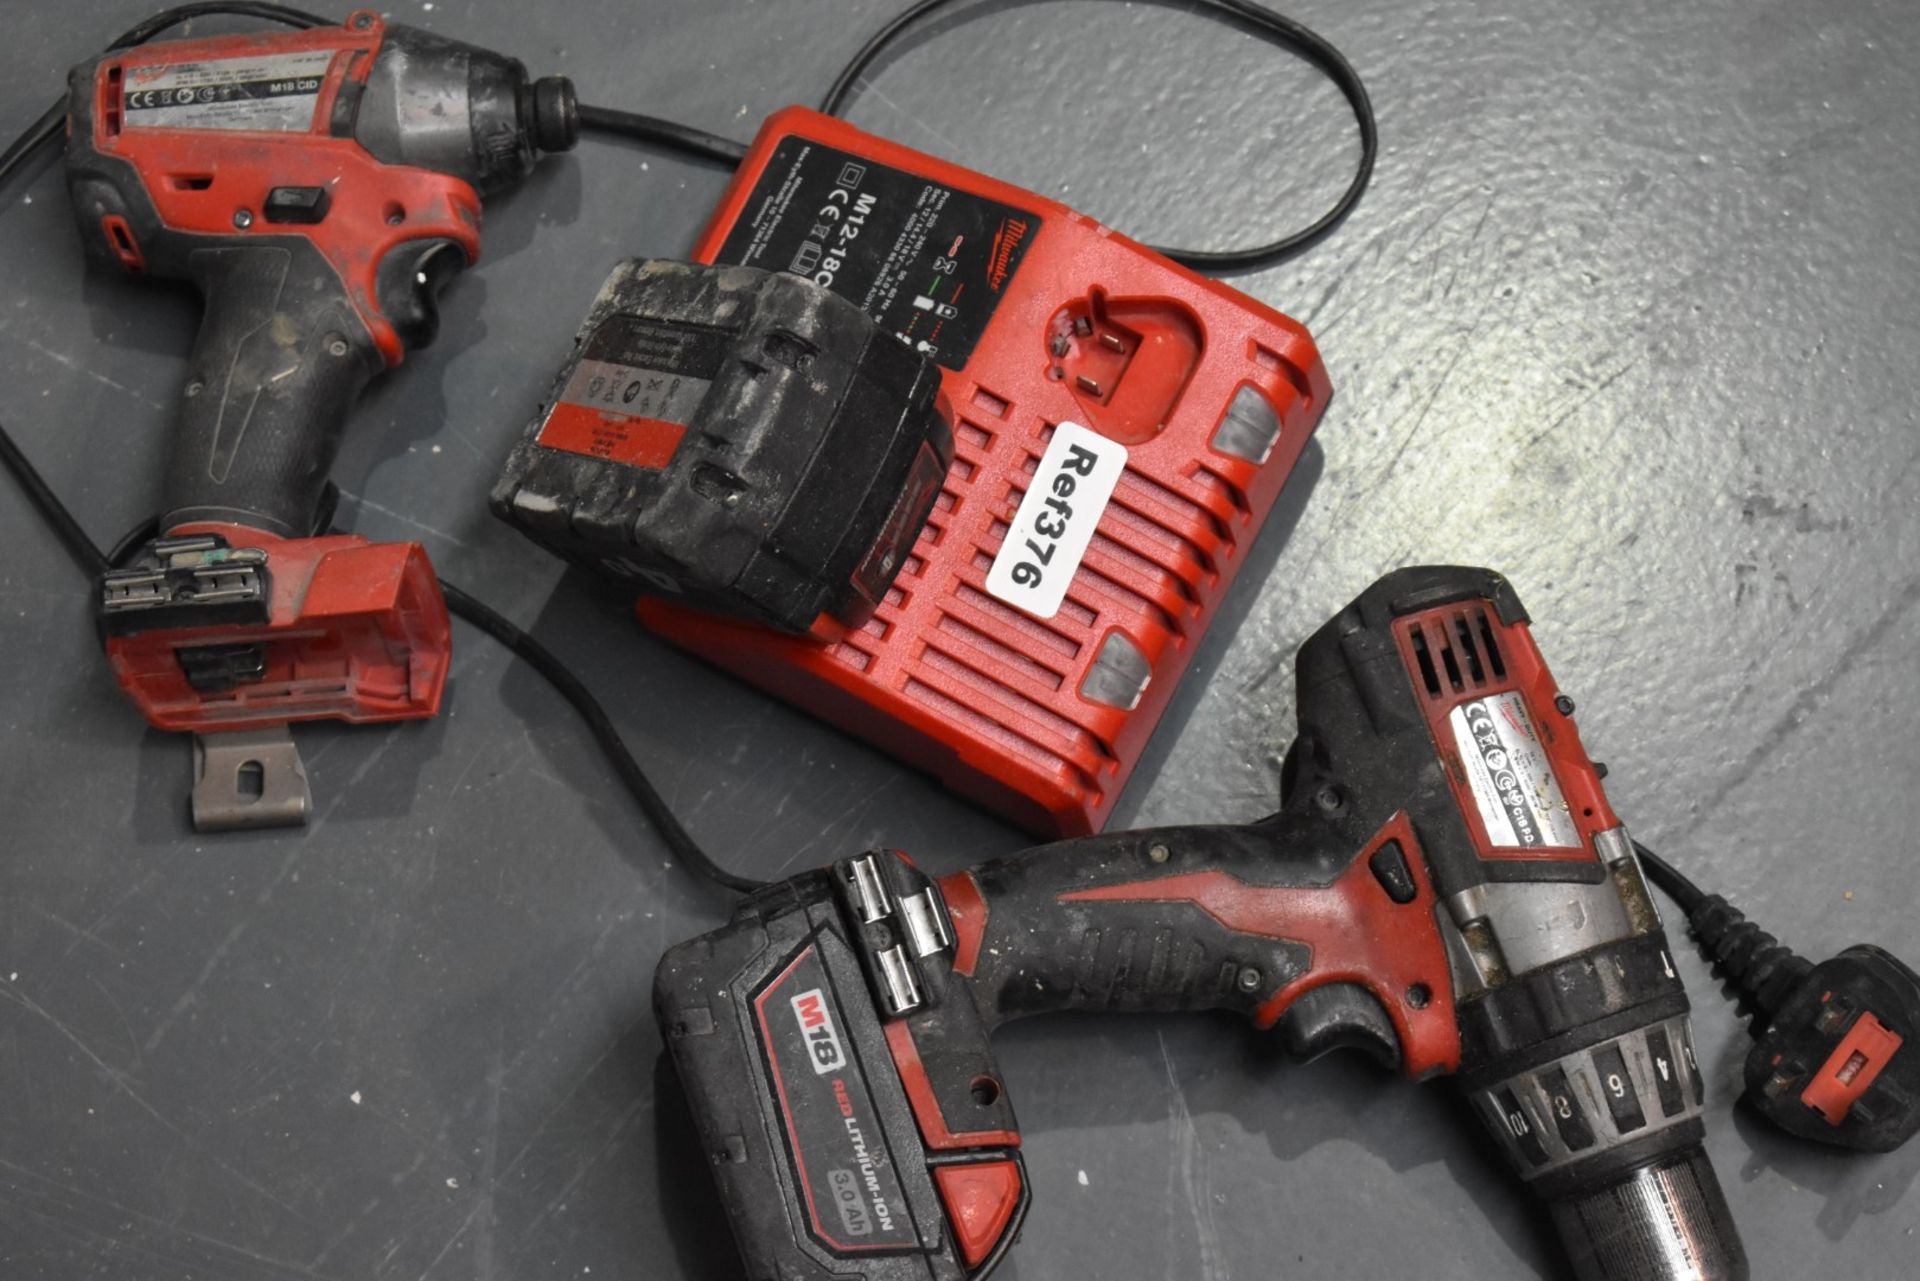 1 x Milwaukee Cordless Heavy Duty Drill Set - Includes 2 x Drills, 2 x Batteries and 1 x Charger - - Bild 7 aus 7